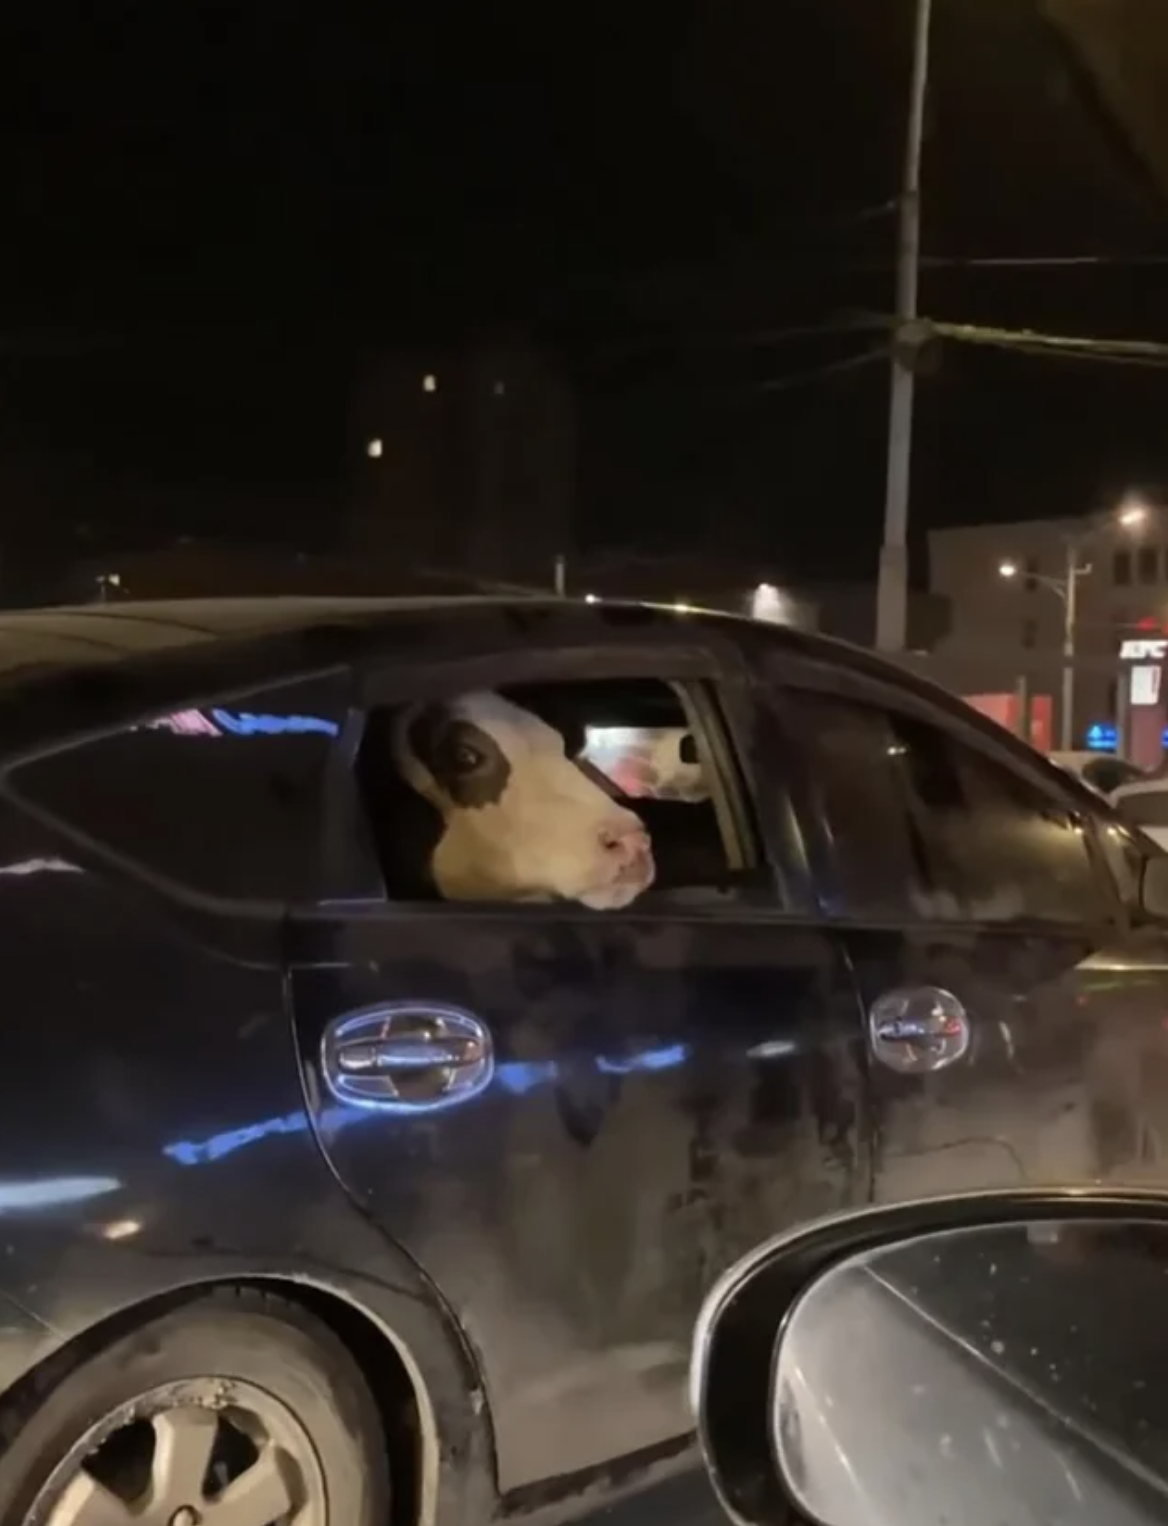 cow in the backseat of the car with his head out the window